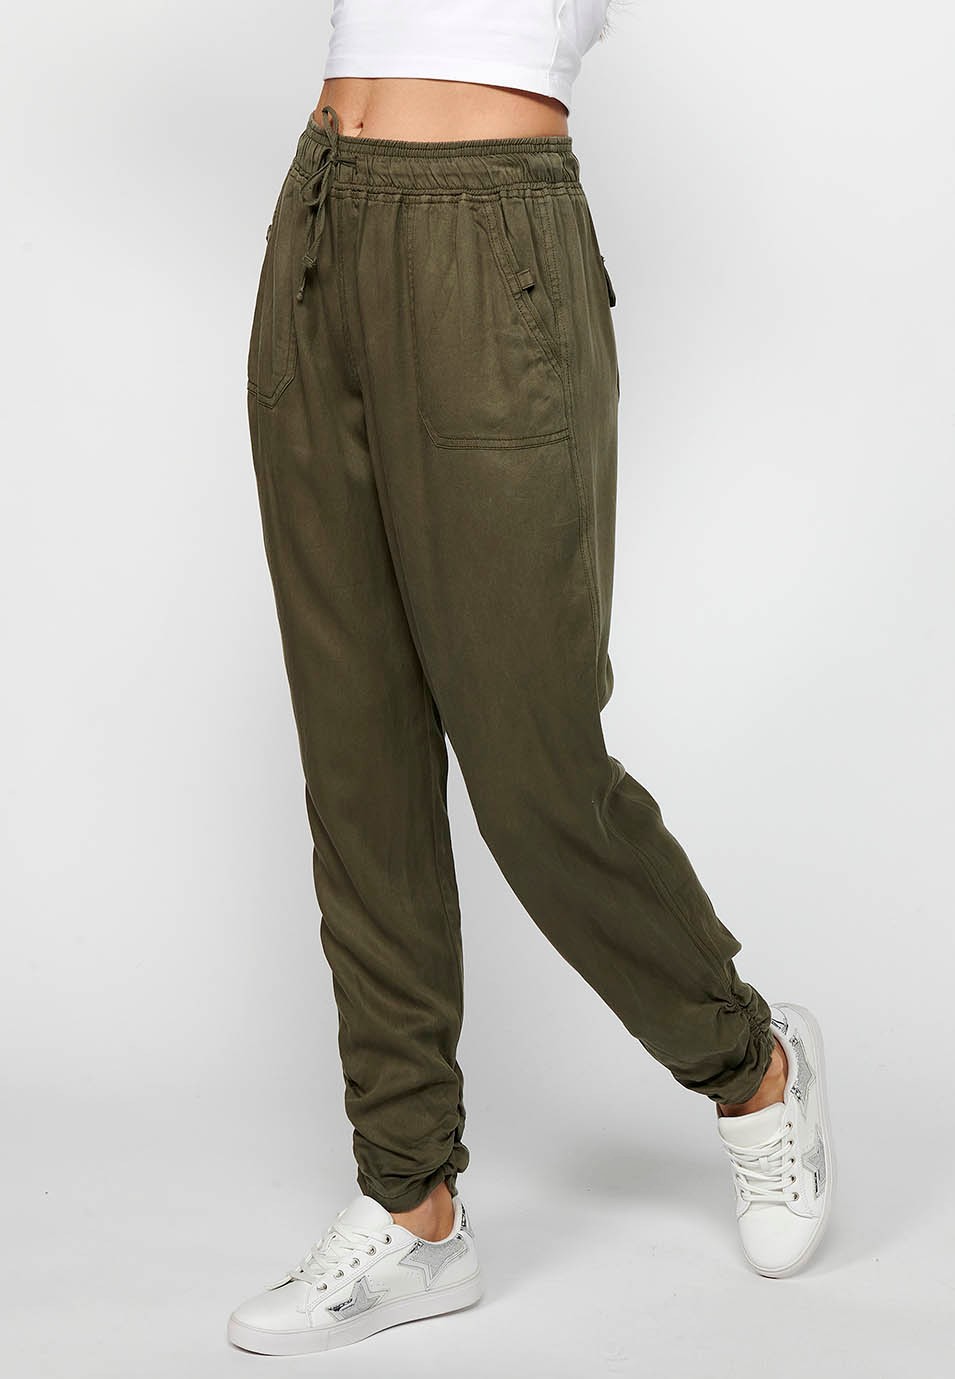 Long jogger pants with curled finish and rubberized waist with four pockets, two rear pockets with flap in Khaki color for women 2